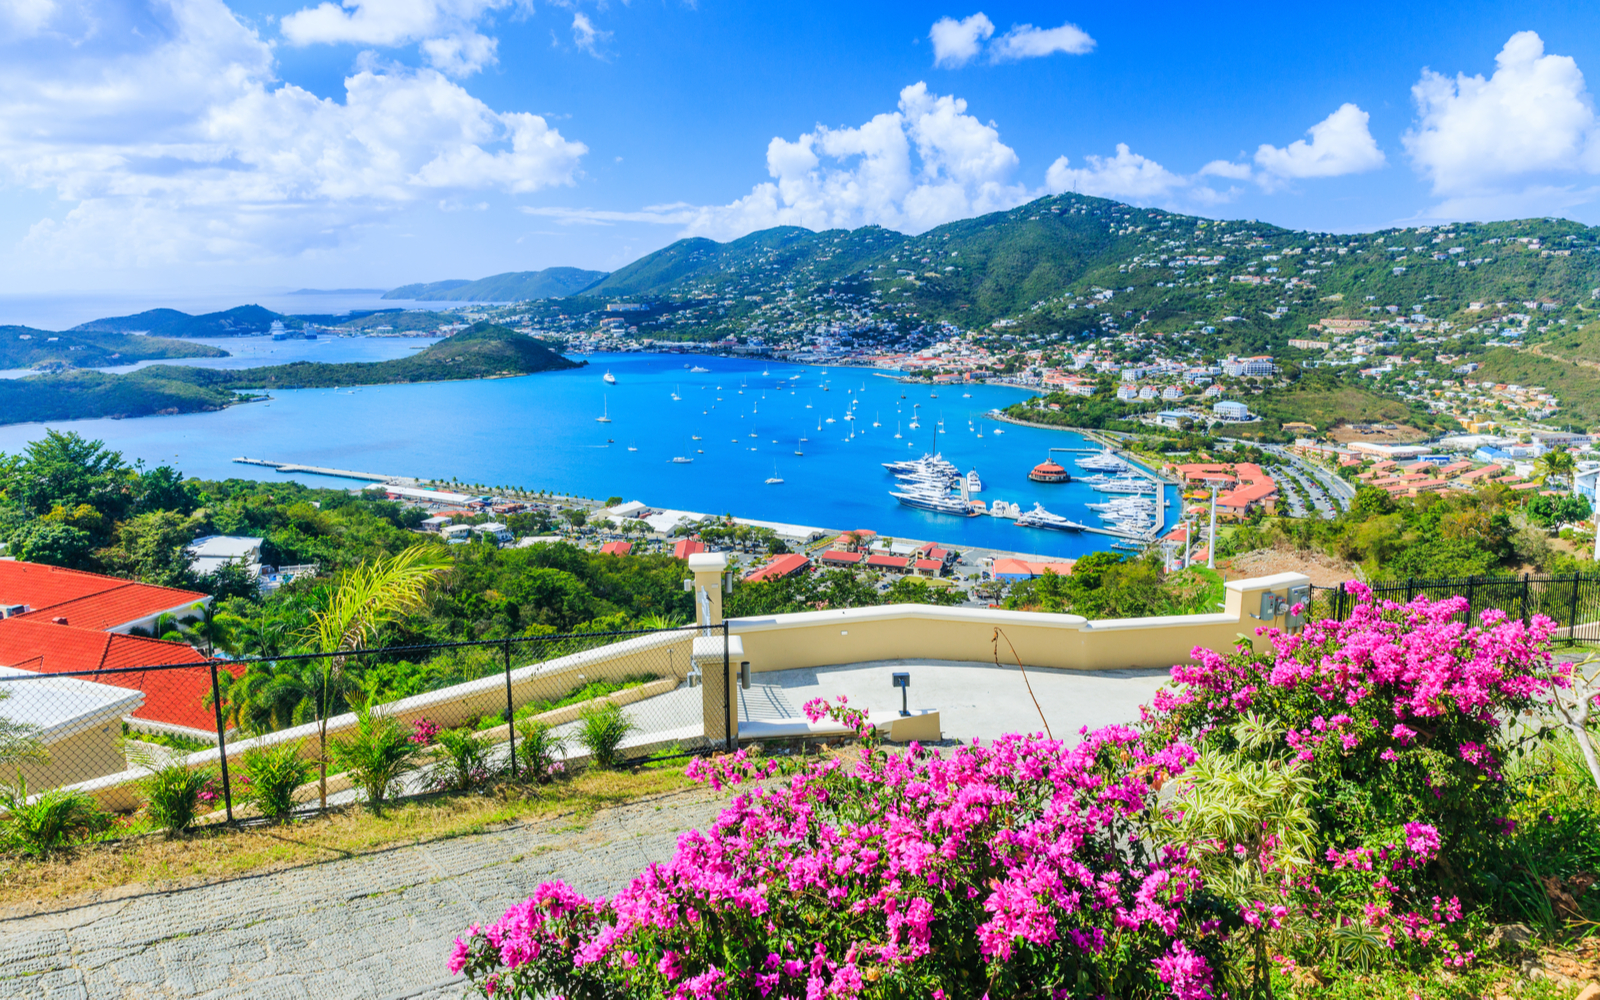 15 Best Resorts in St. Thomas in 2022